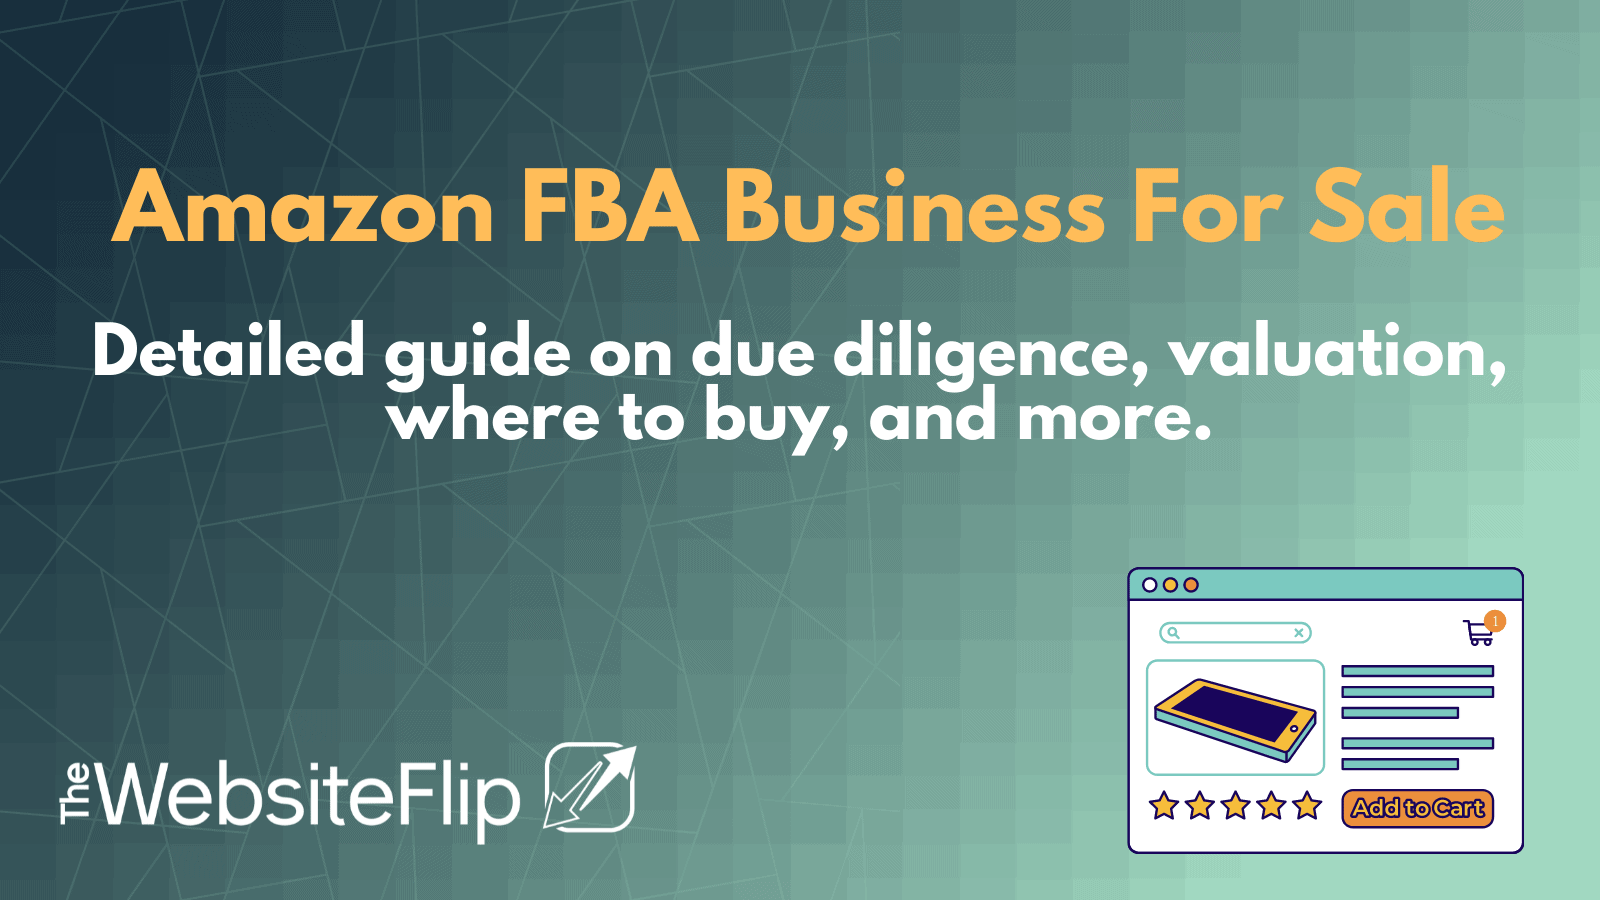 Amazon FBA Business For Sale